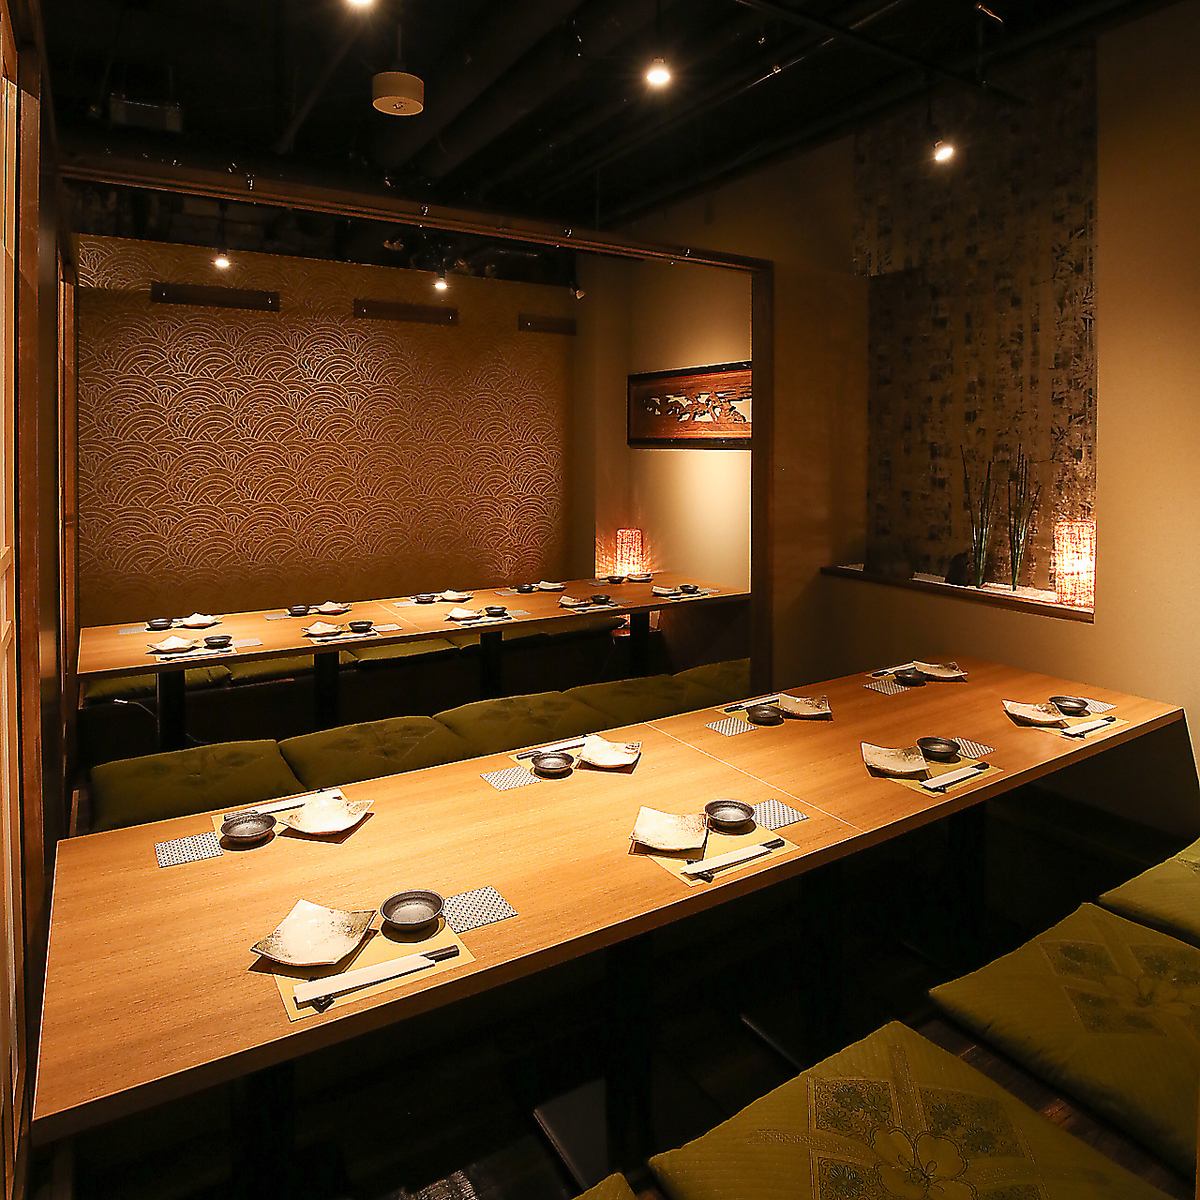 Perfect for drinking parties. We can accommodate up to 40 people in our private sunken kotatsu room.